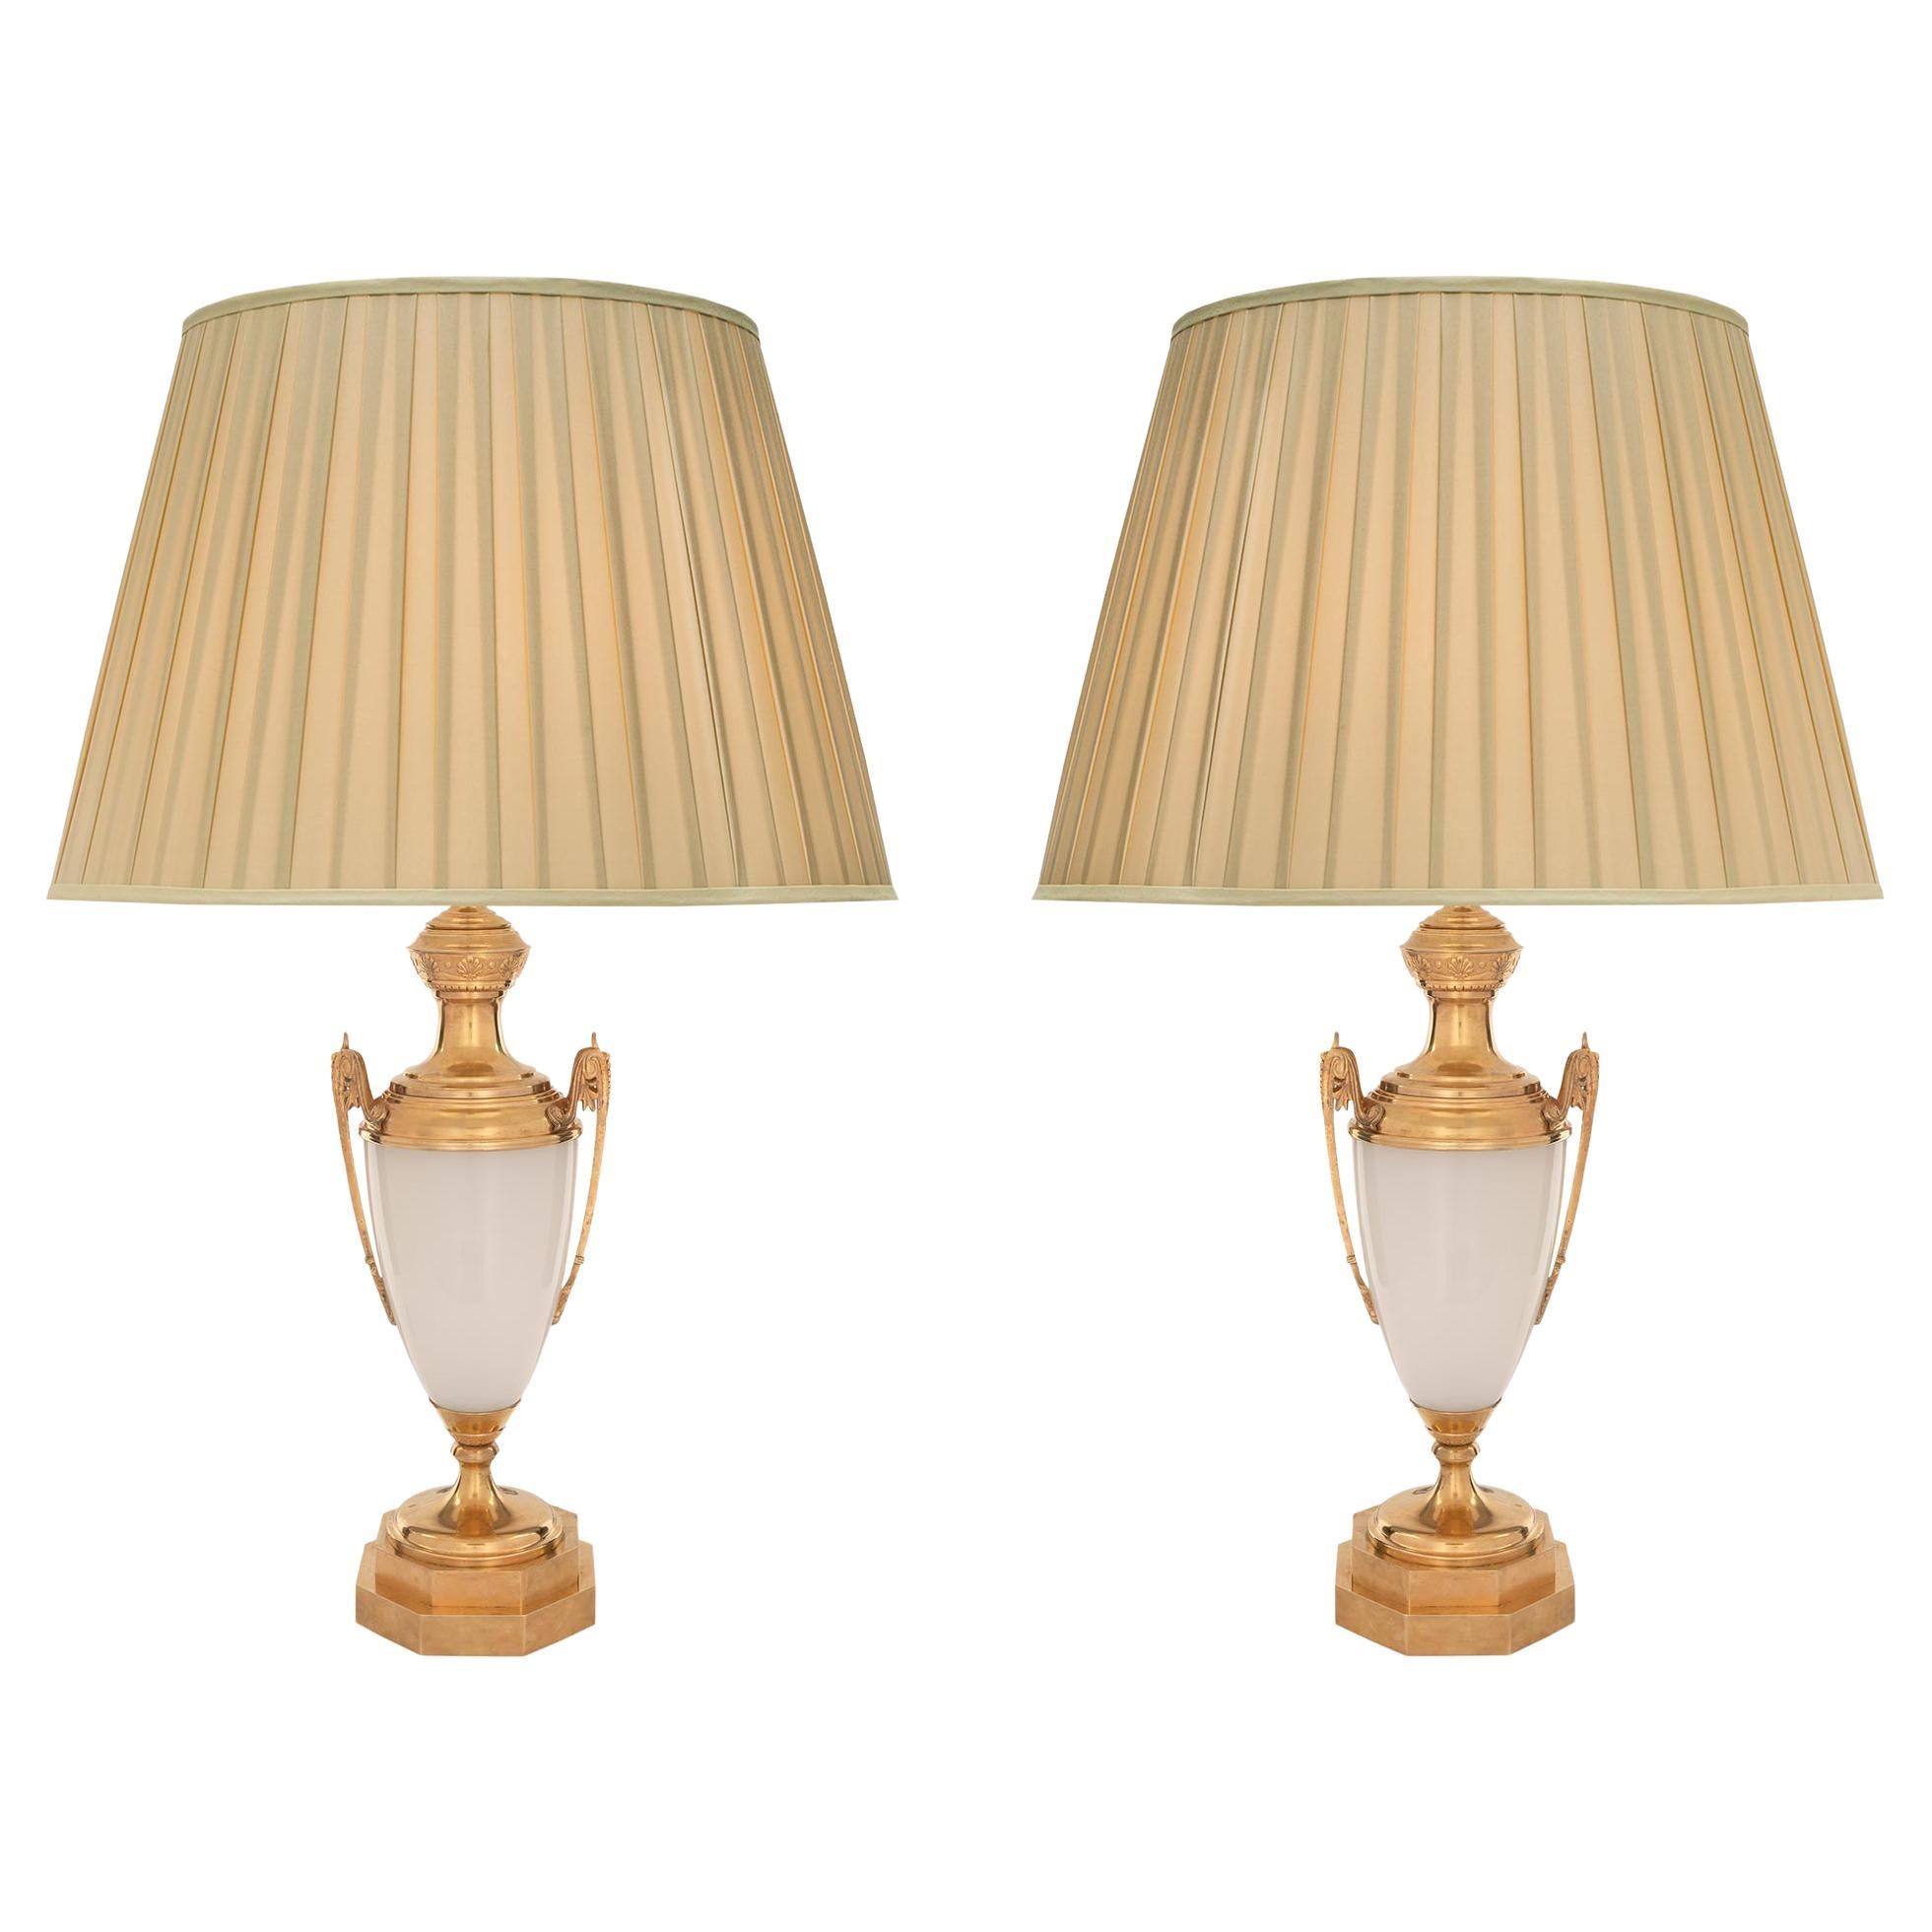 pair of lamps /bedside/opaline/white/40s/vintage French